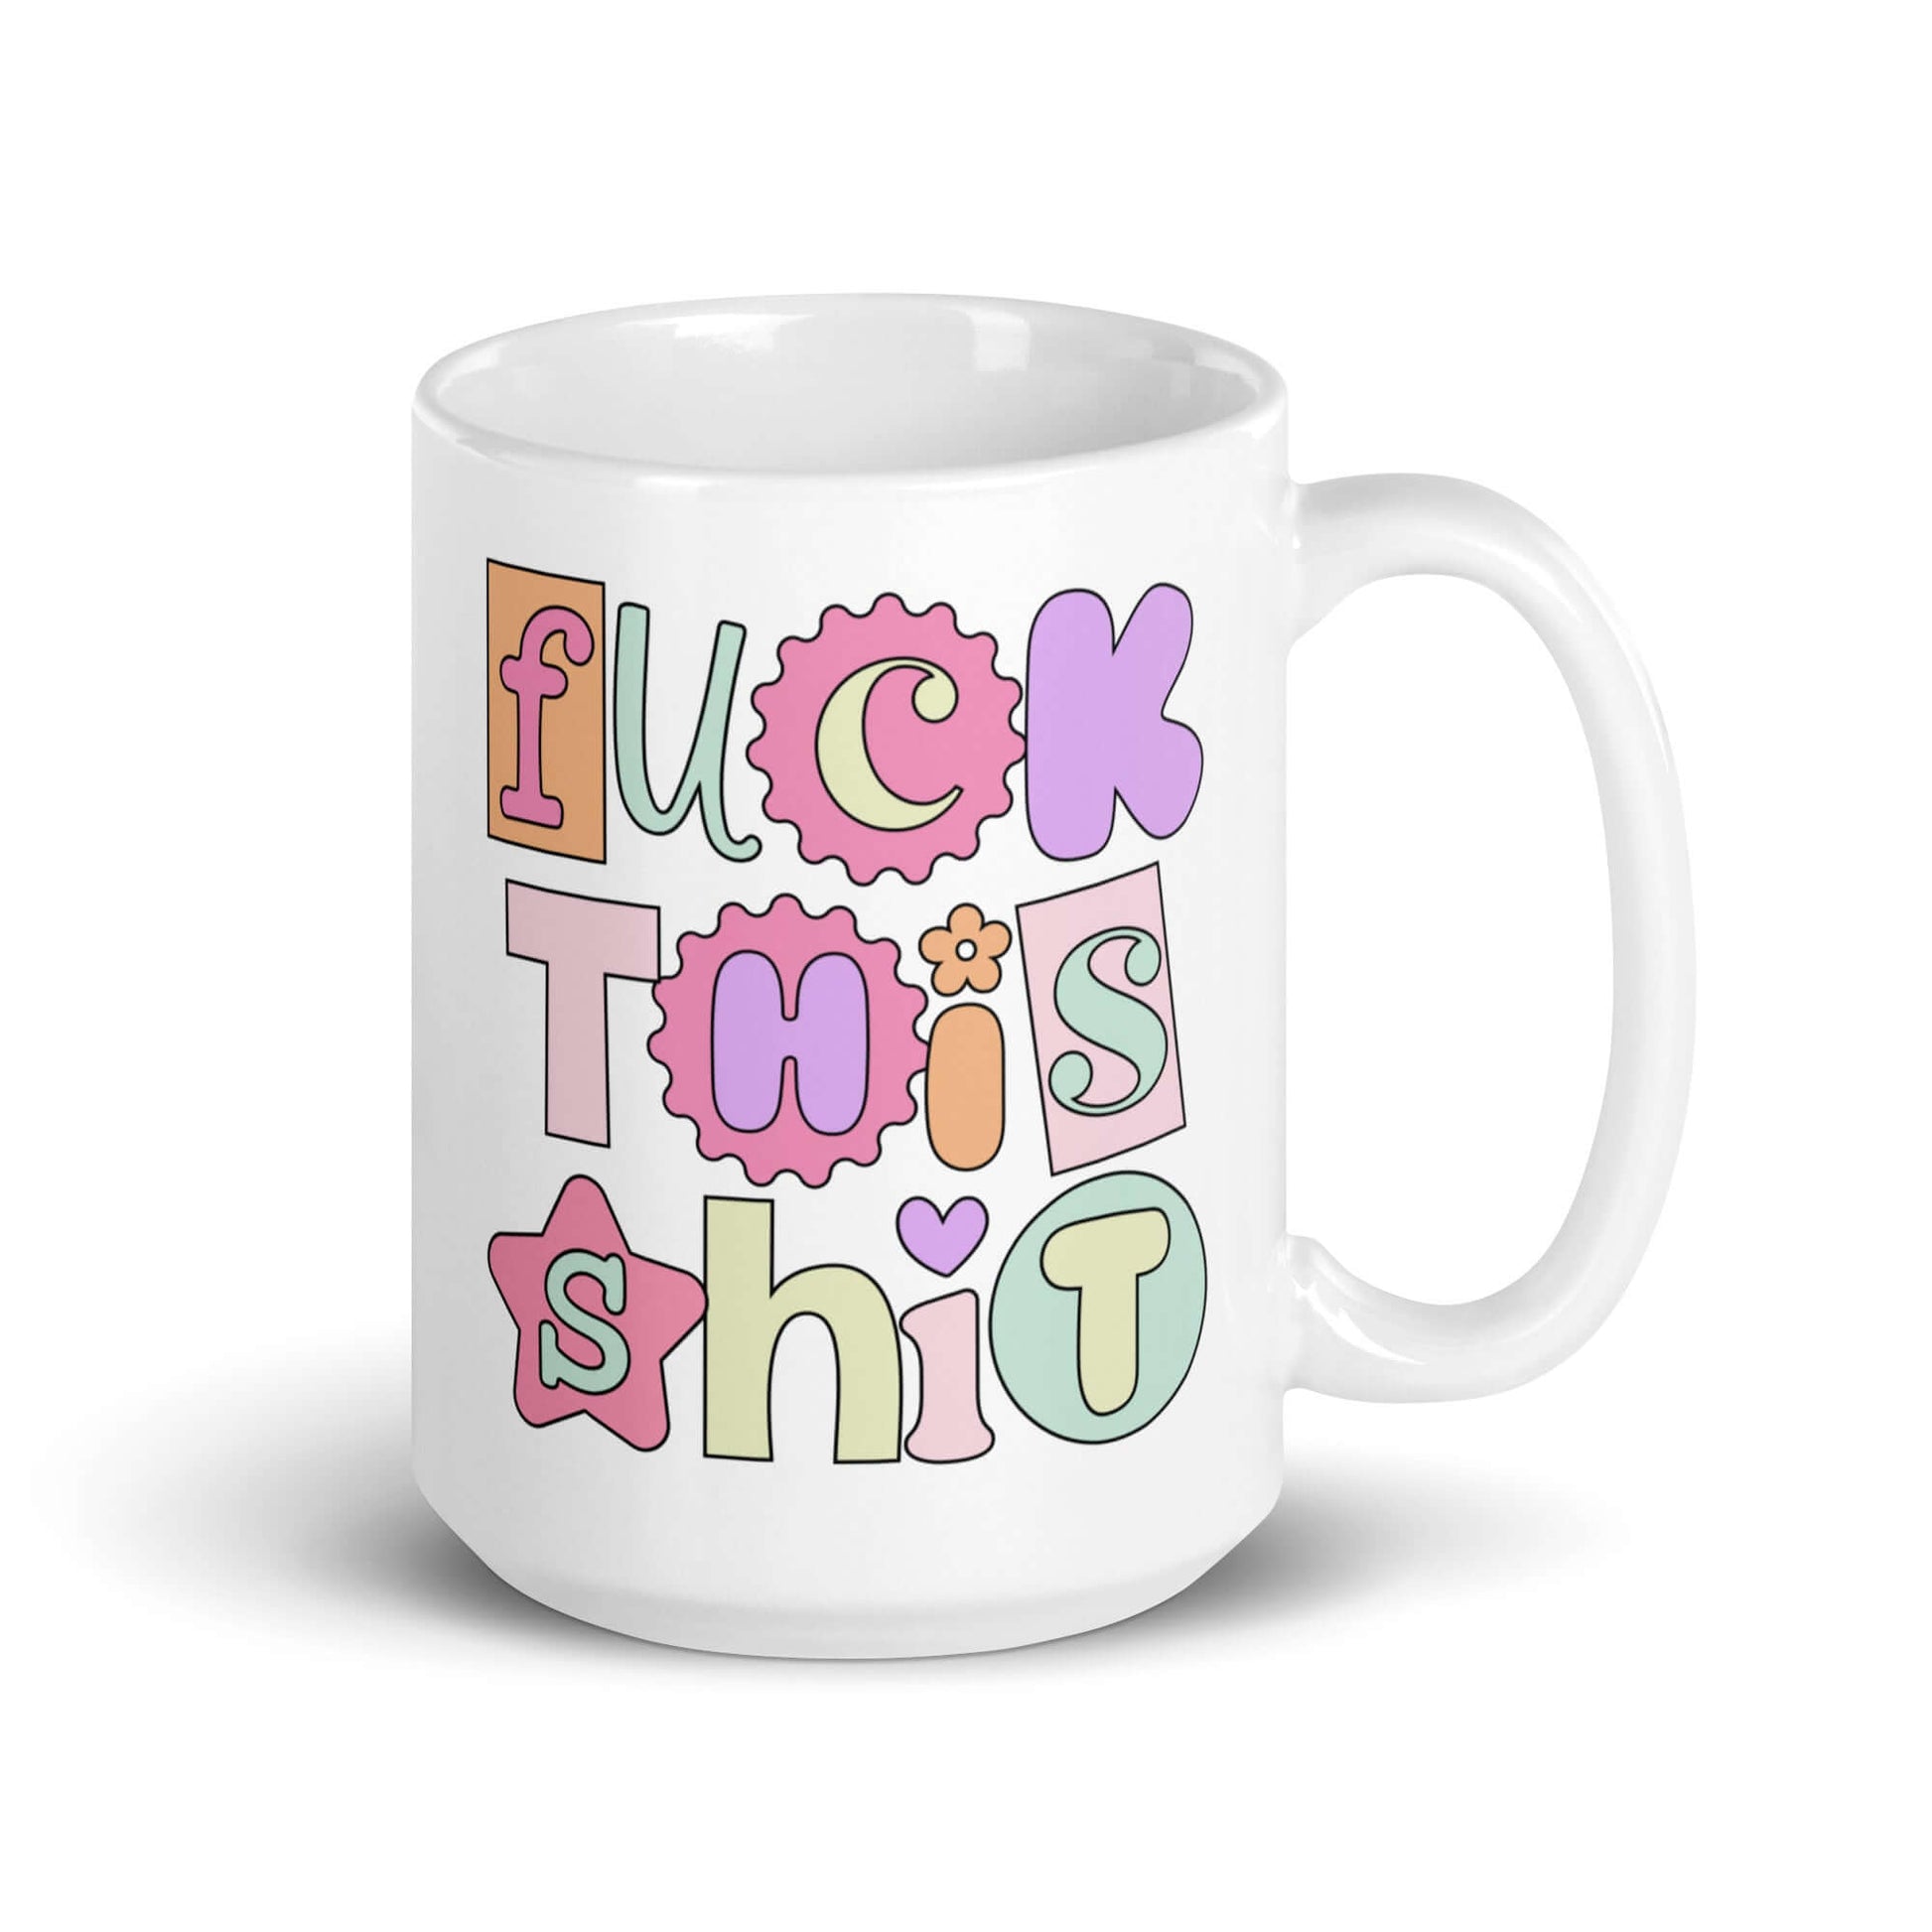 White ceramic coffee mug with colorful pastel font Fuck this shit graphics printed on both sides.